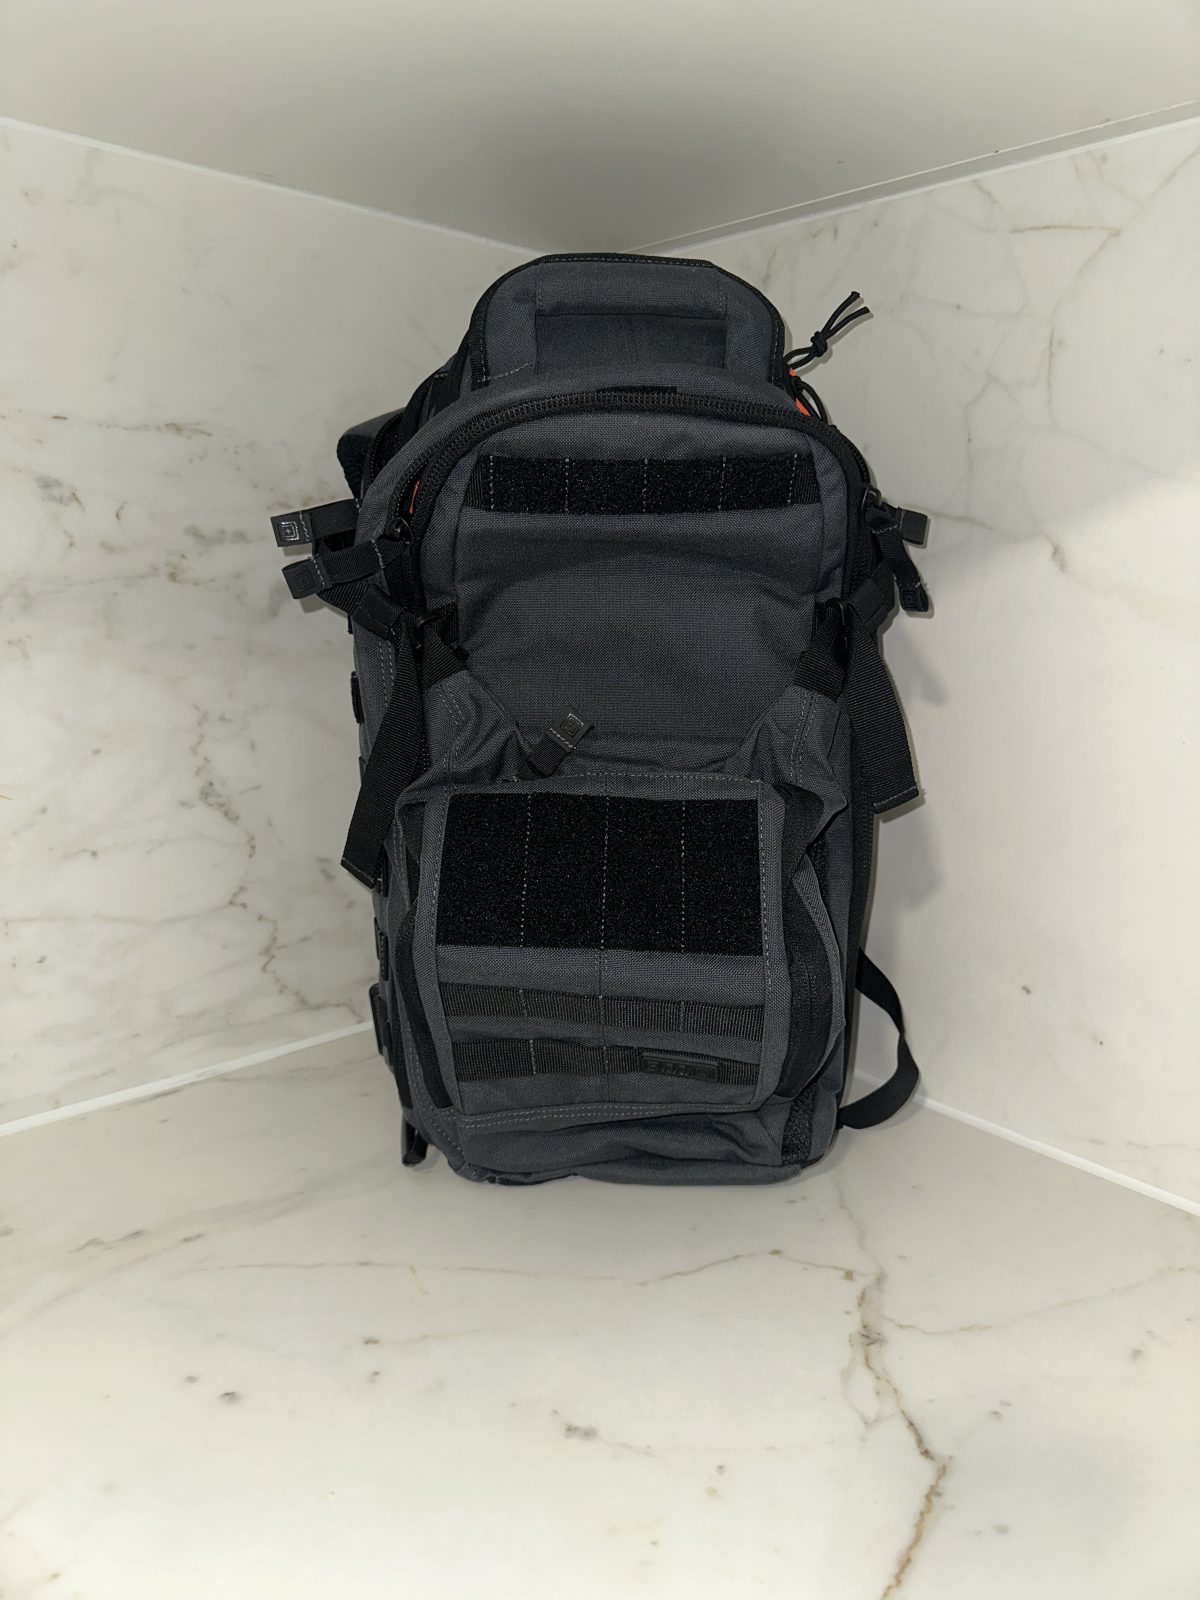 5.11 All Hazards Nitro backpack overall look